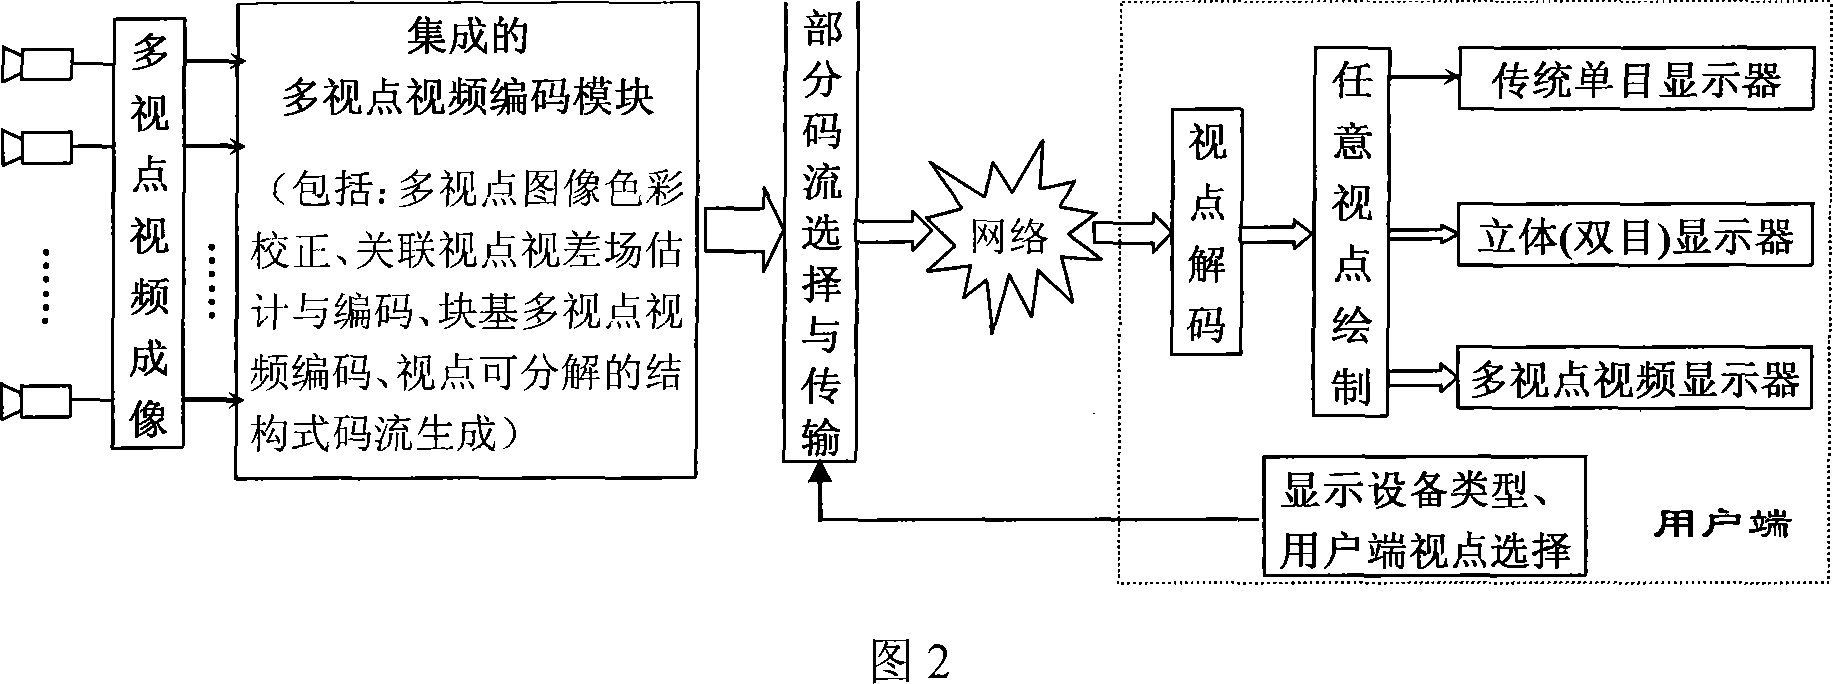 Image signal processing method of the interactive multi-view video system